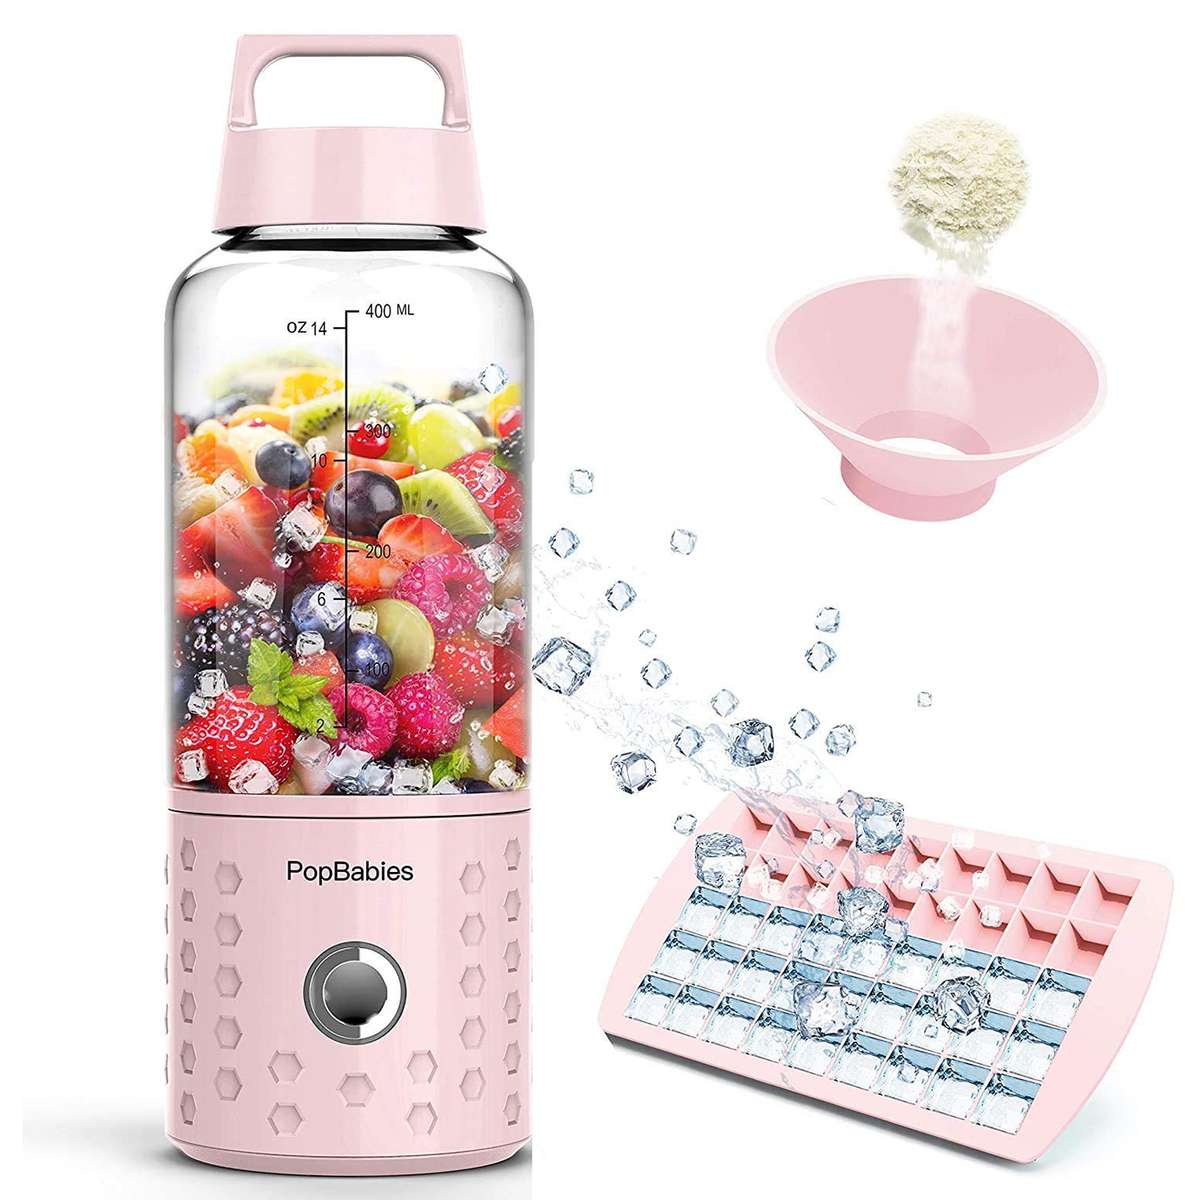 PopBabies Portable Blender, Smoothie Blender for Shakes and Smoothies,